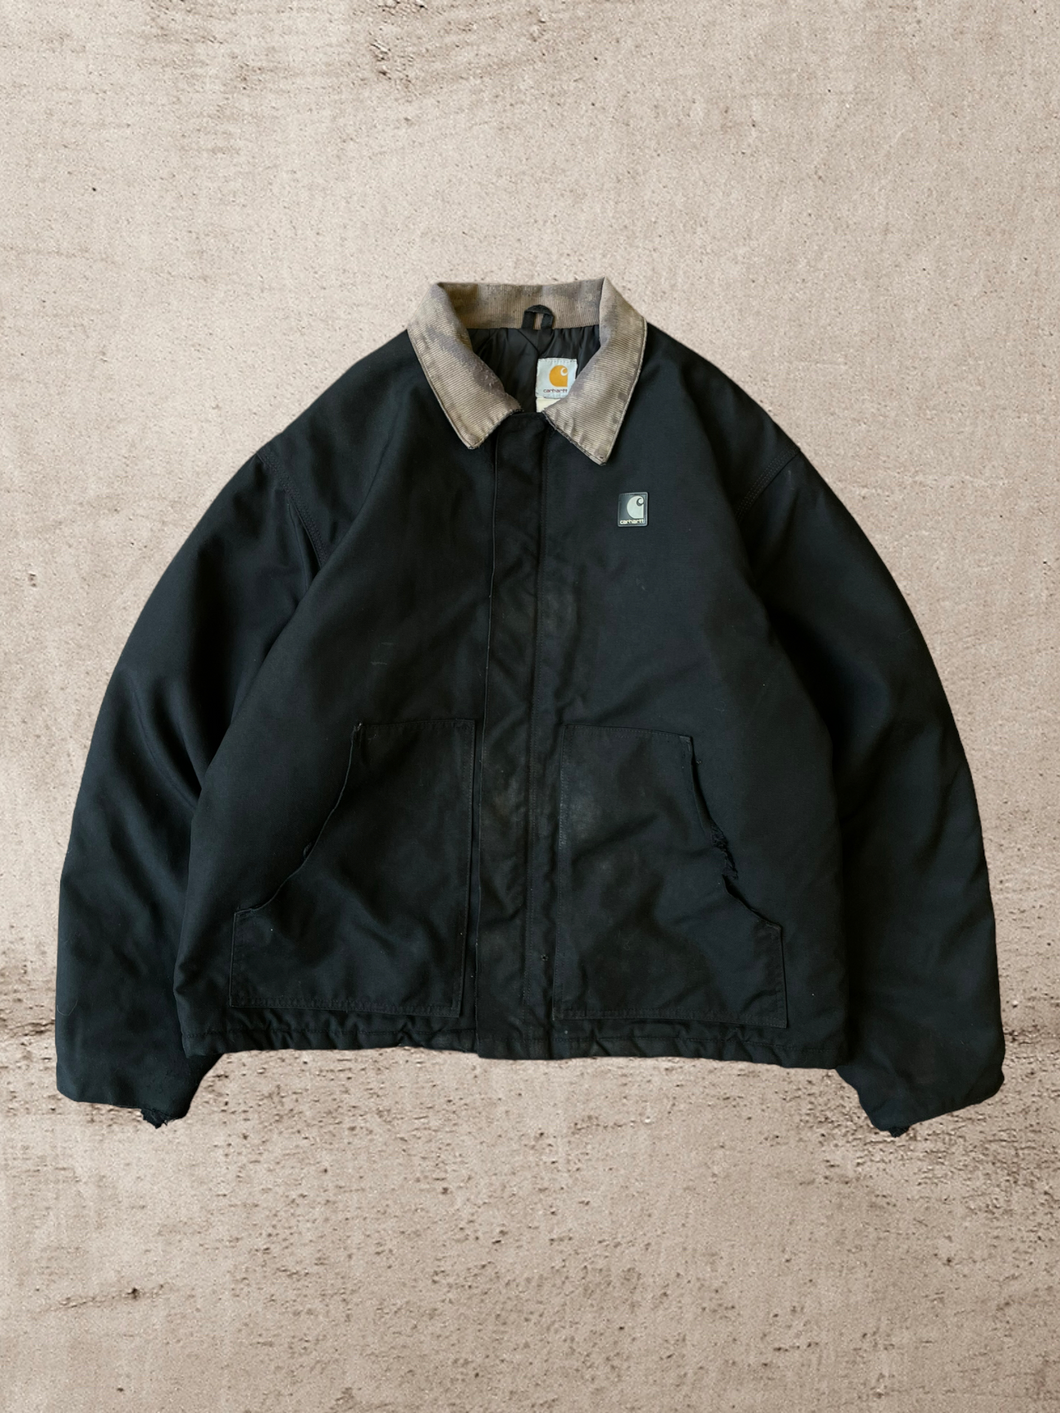 90s Carhartt Detroit Quilted Lined Jacket - XL